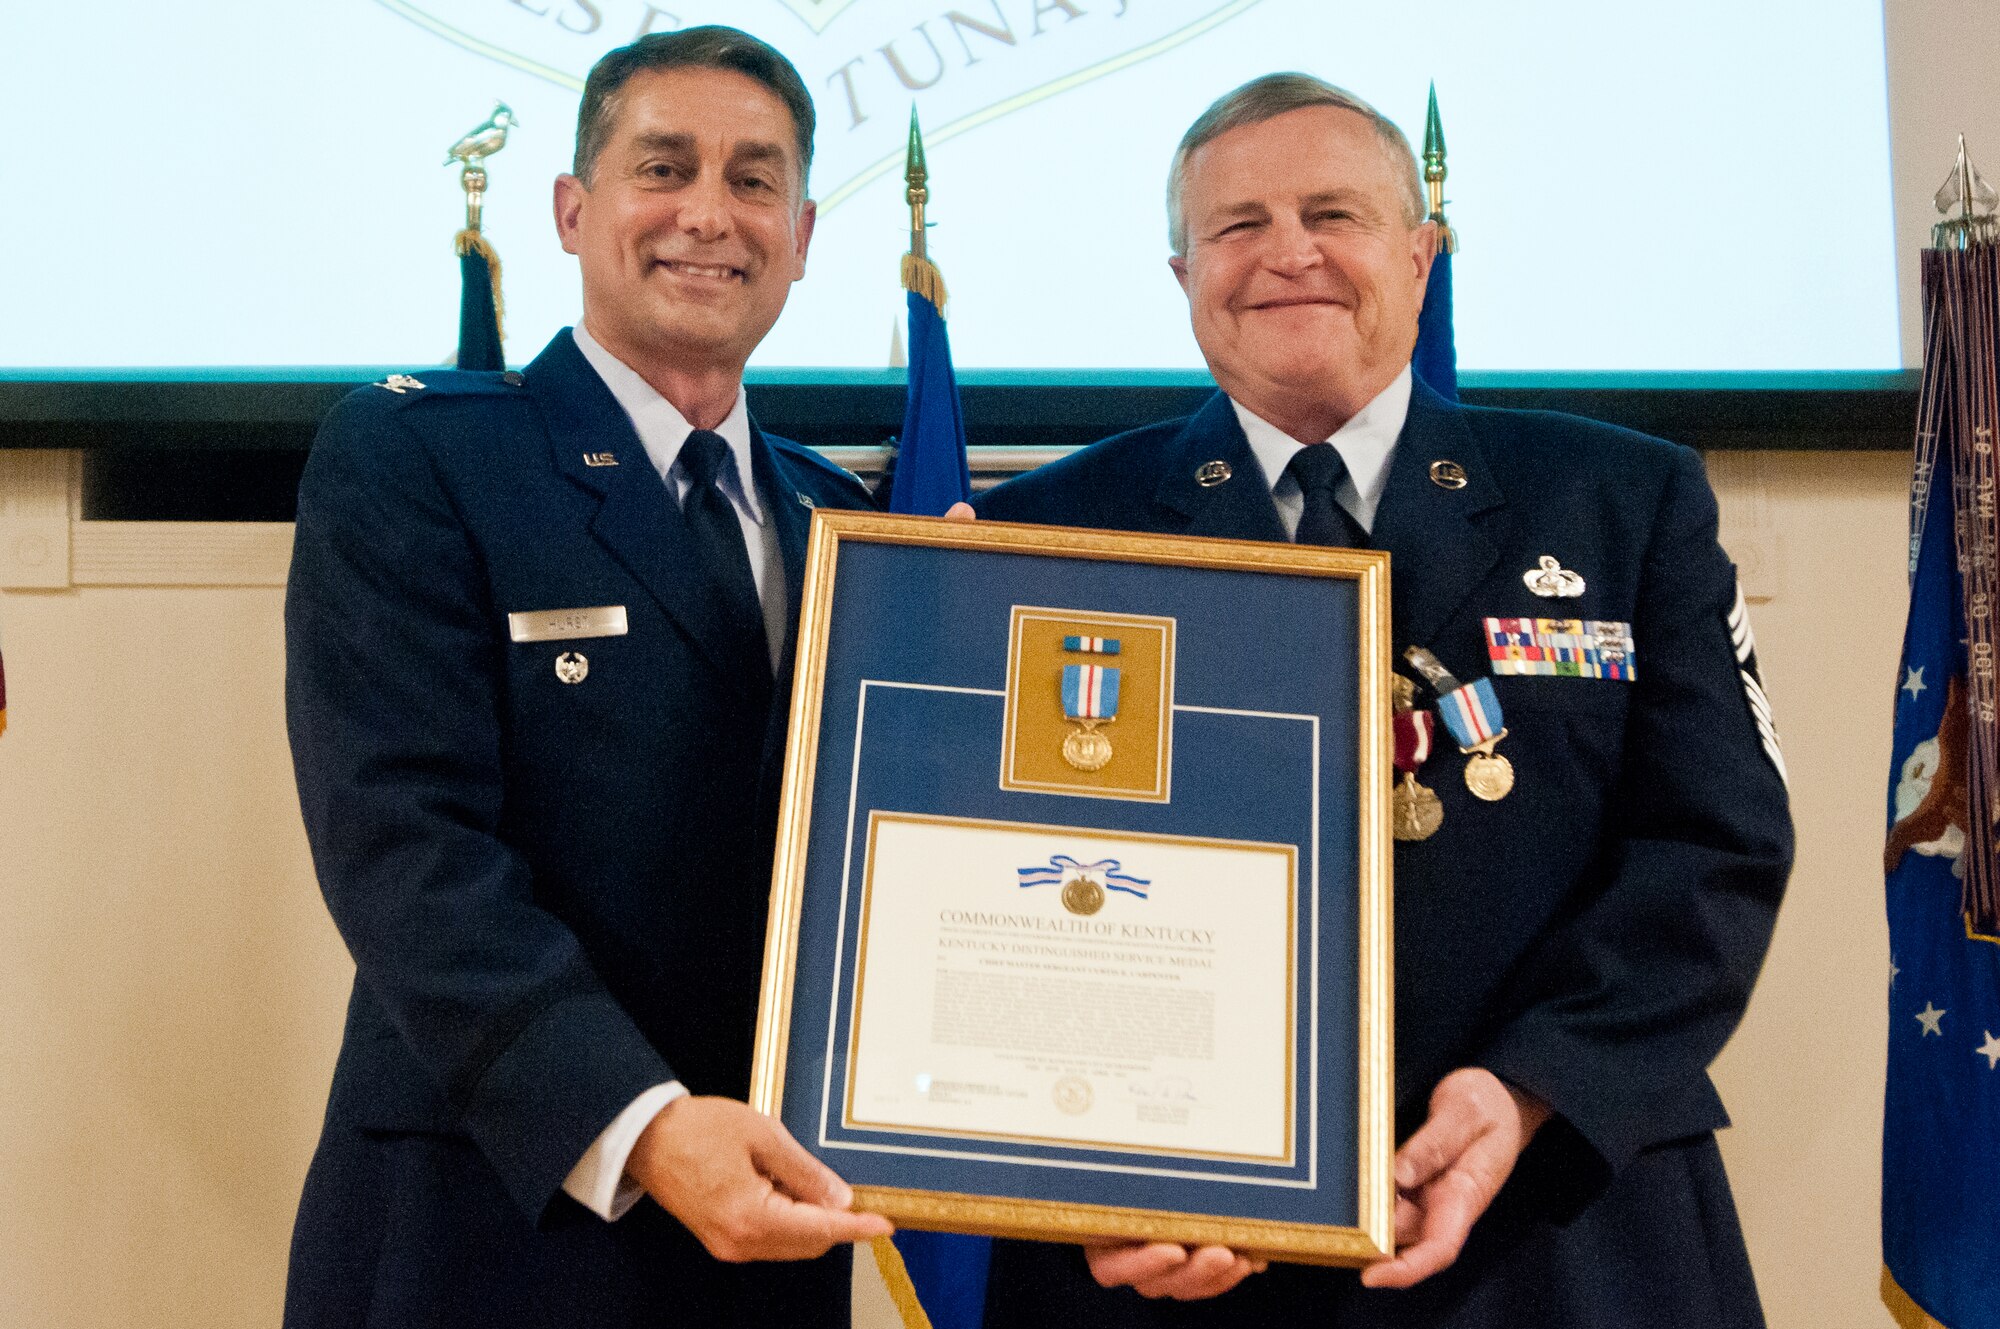 Col. Warren Hurst (left), Kentucky’s assistant adjutant general for Air, presents the Kentucky Distinguished Service Medal to Chief Master Sgt. Curtis R. Carpenter, outgoing 123rd Airlift Wing command chief, during Carpenter’s retirement ceremony at the Kentucky Air National Guard Base in Louisville, Ky., on May 17, 2014. Carpenter served in the active-duty Air Force and Air National Guard for more than 34 years. (U.S. Air National Guard photo by Airman 1st Class Joshua Horton)